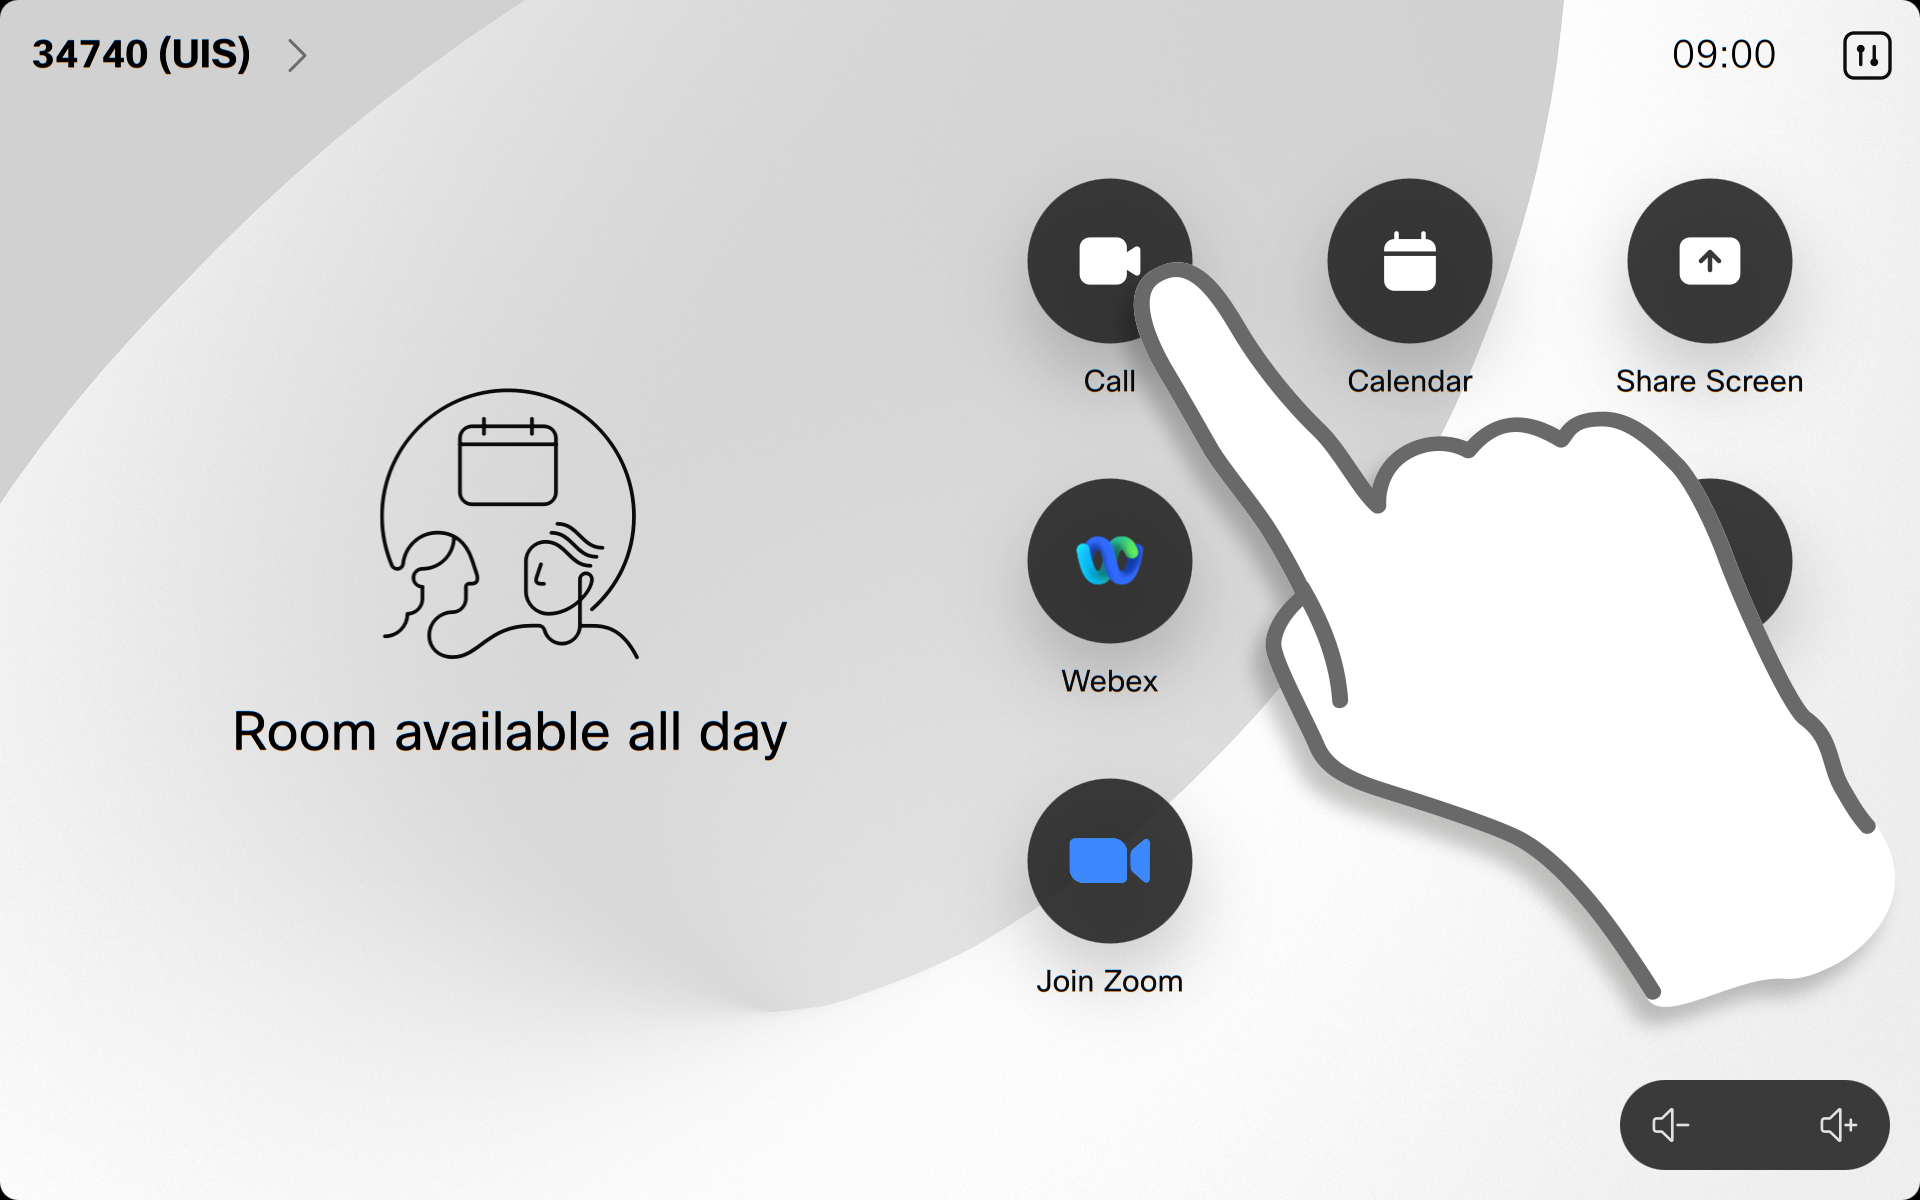 Screenshot showing the Call button on the control panel